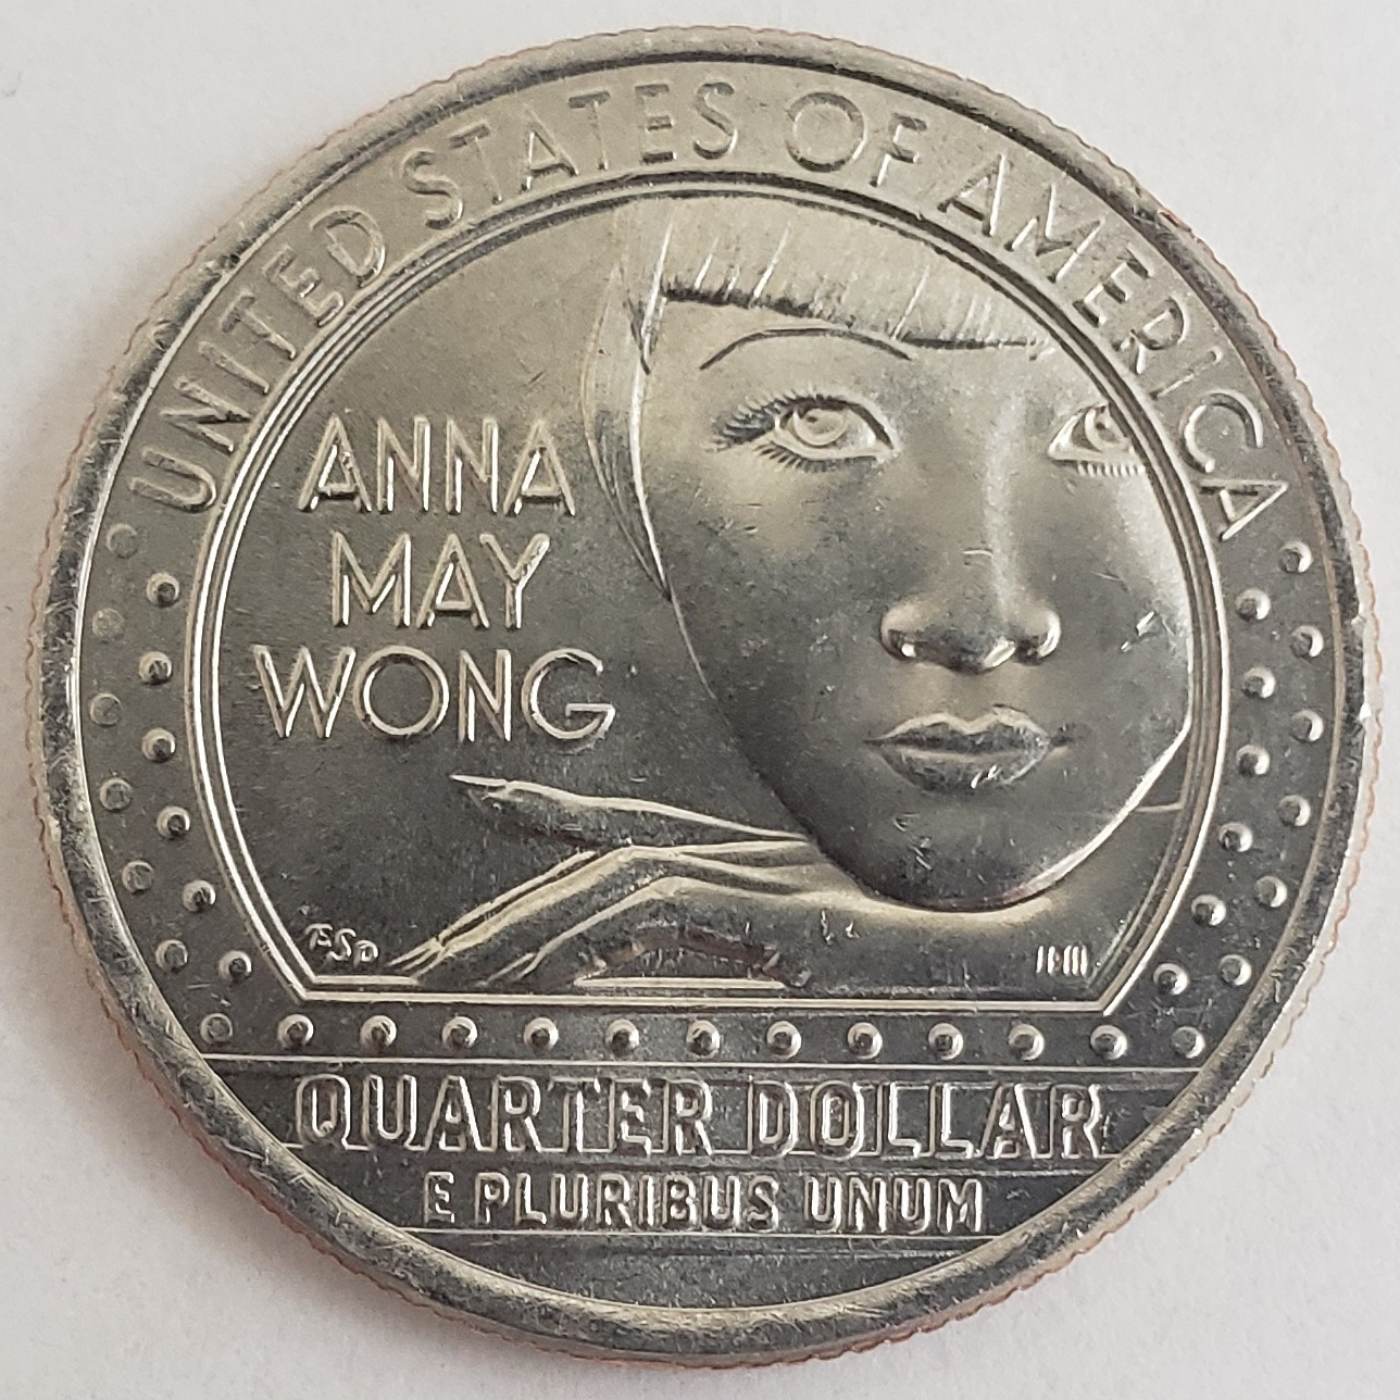 Anna May Wong U.S. Quarter, 2022. Courtesy of Josh Hamerman. Museum of Chinese in America (MOCA) Collection.